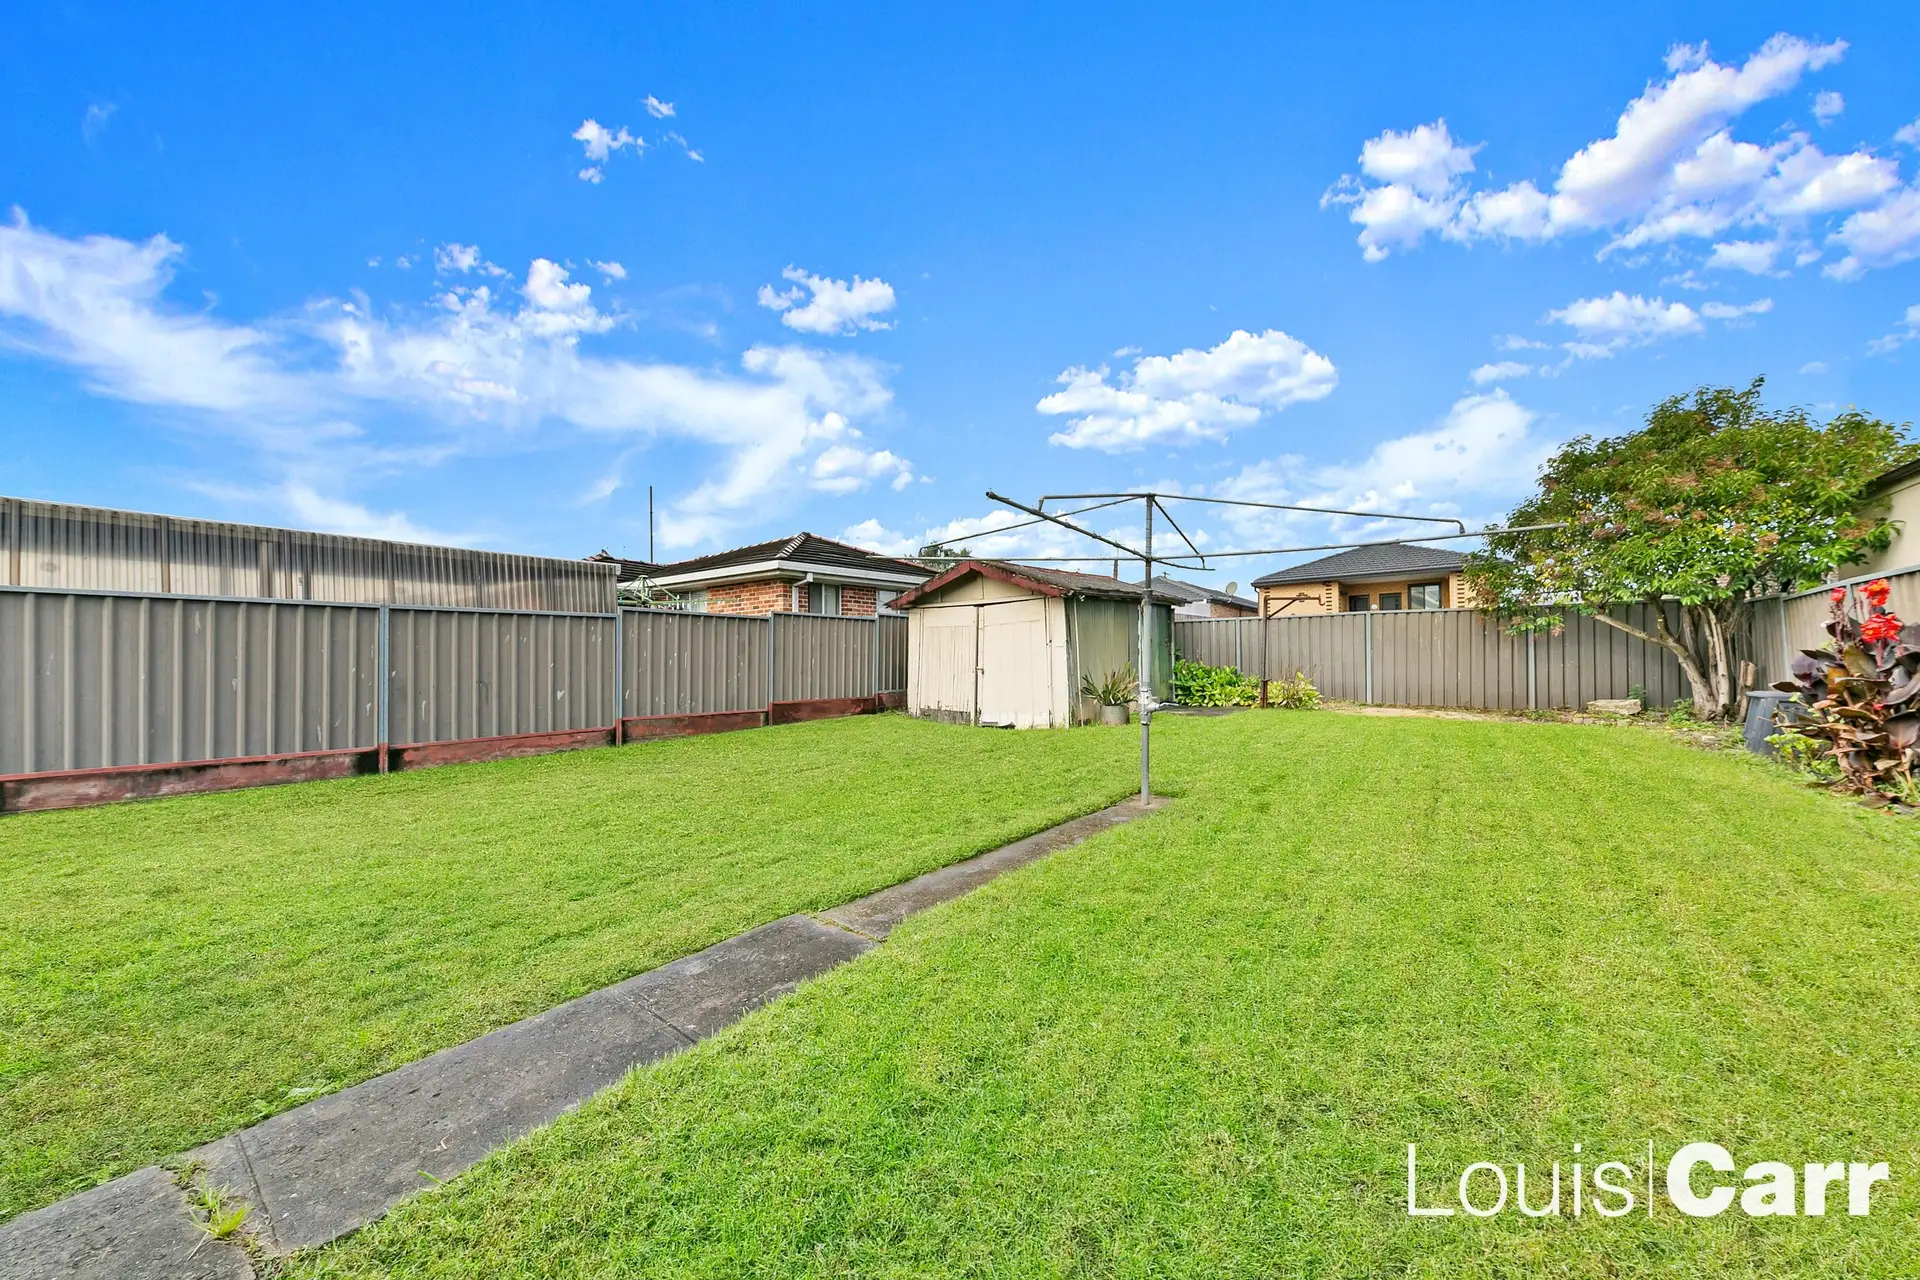 Photo #12: 44 McArthur Street, Guildford - Sold by Louis Carr Real Estate